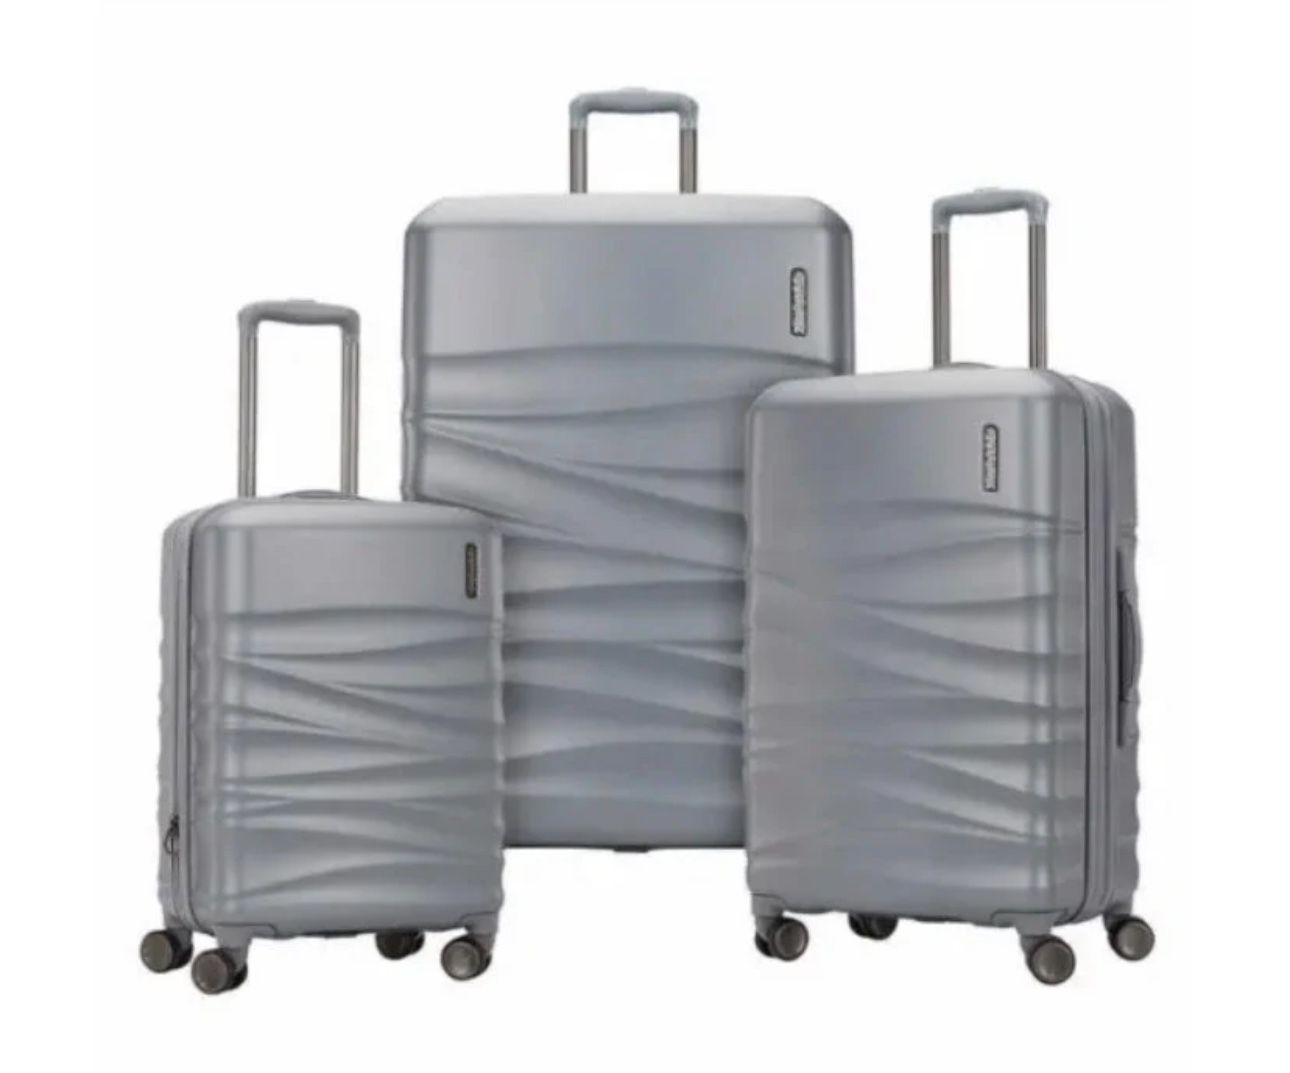 American Tourister Tranquil 3-piece Hardside Suitcase Luggage Set - Silver Gray